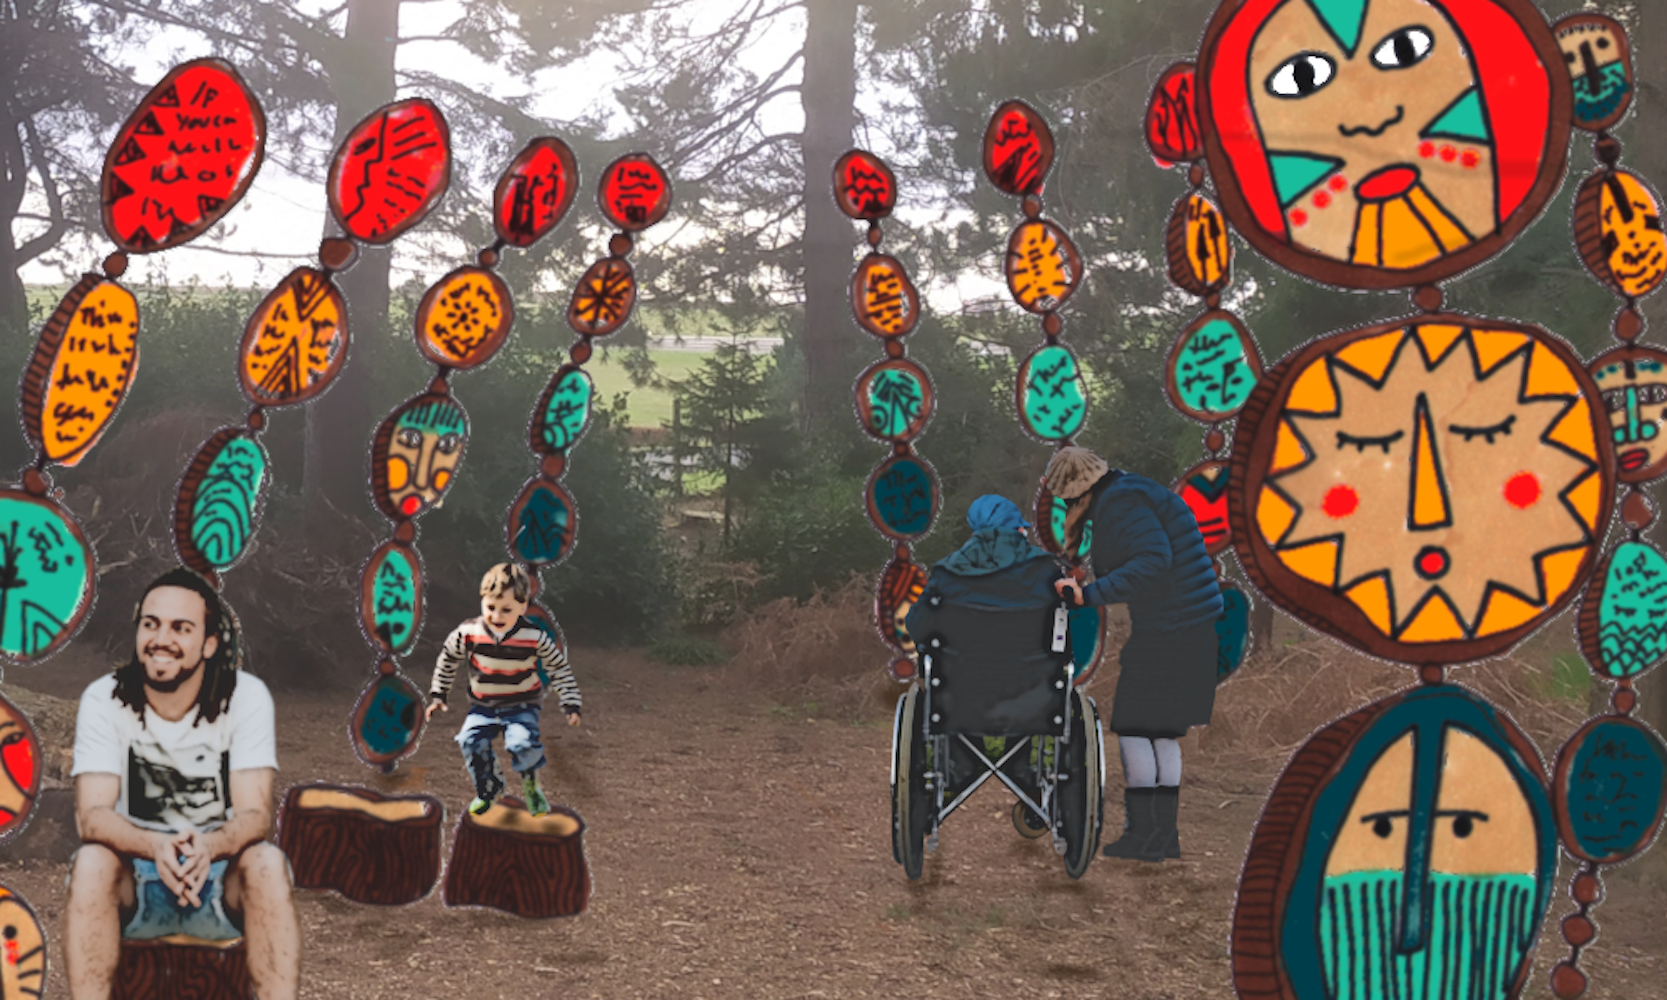 Photo of people in gardens with artwork overlaid.